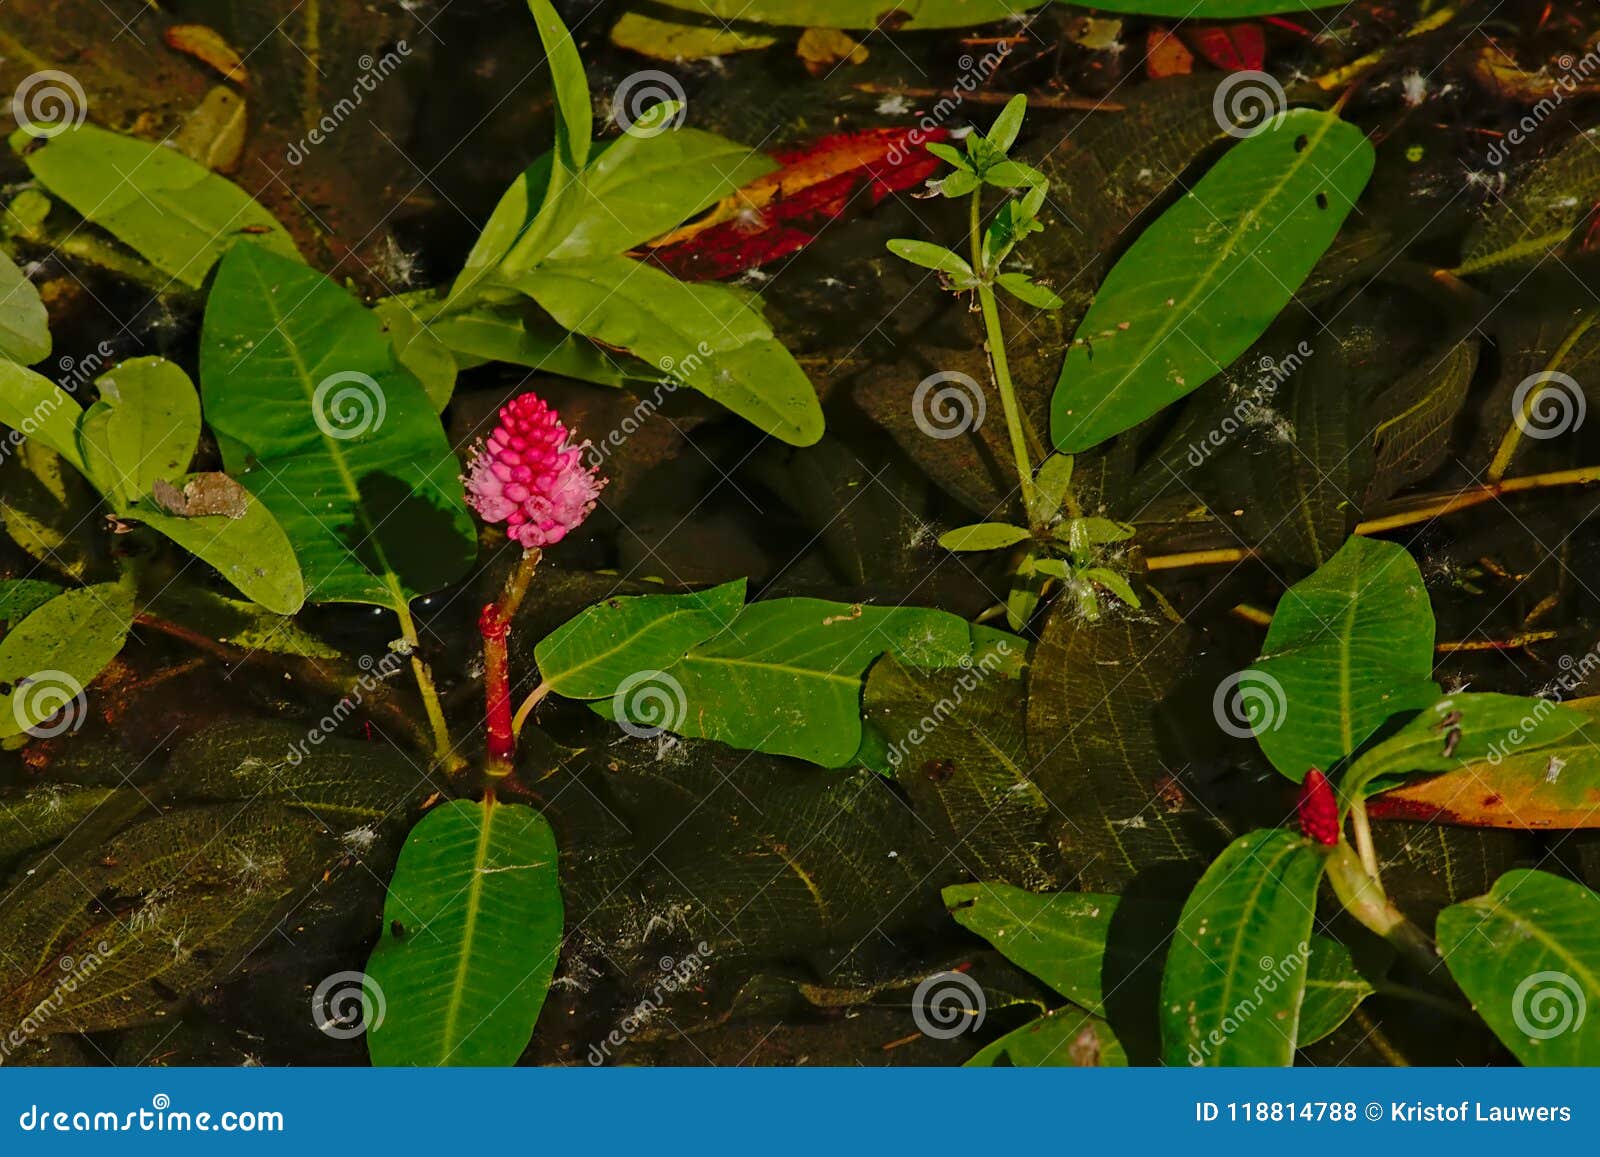 water knotweed with pink flower - persicaria amphibia